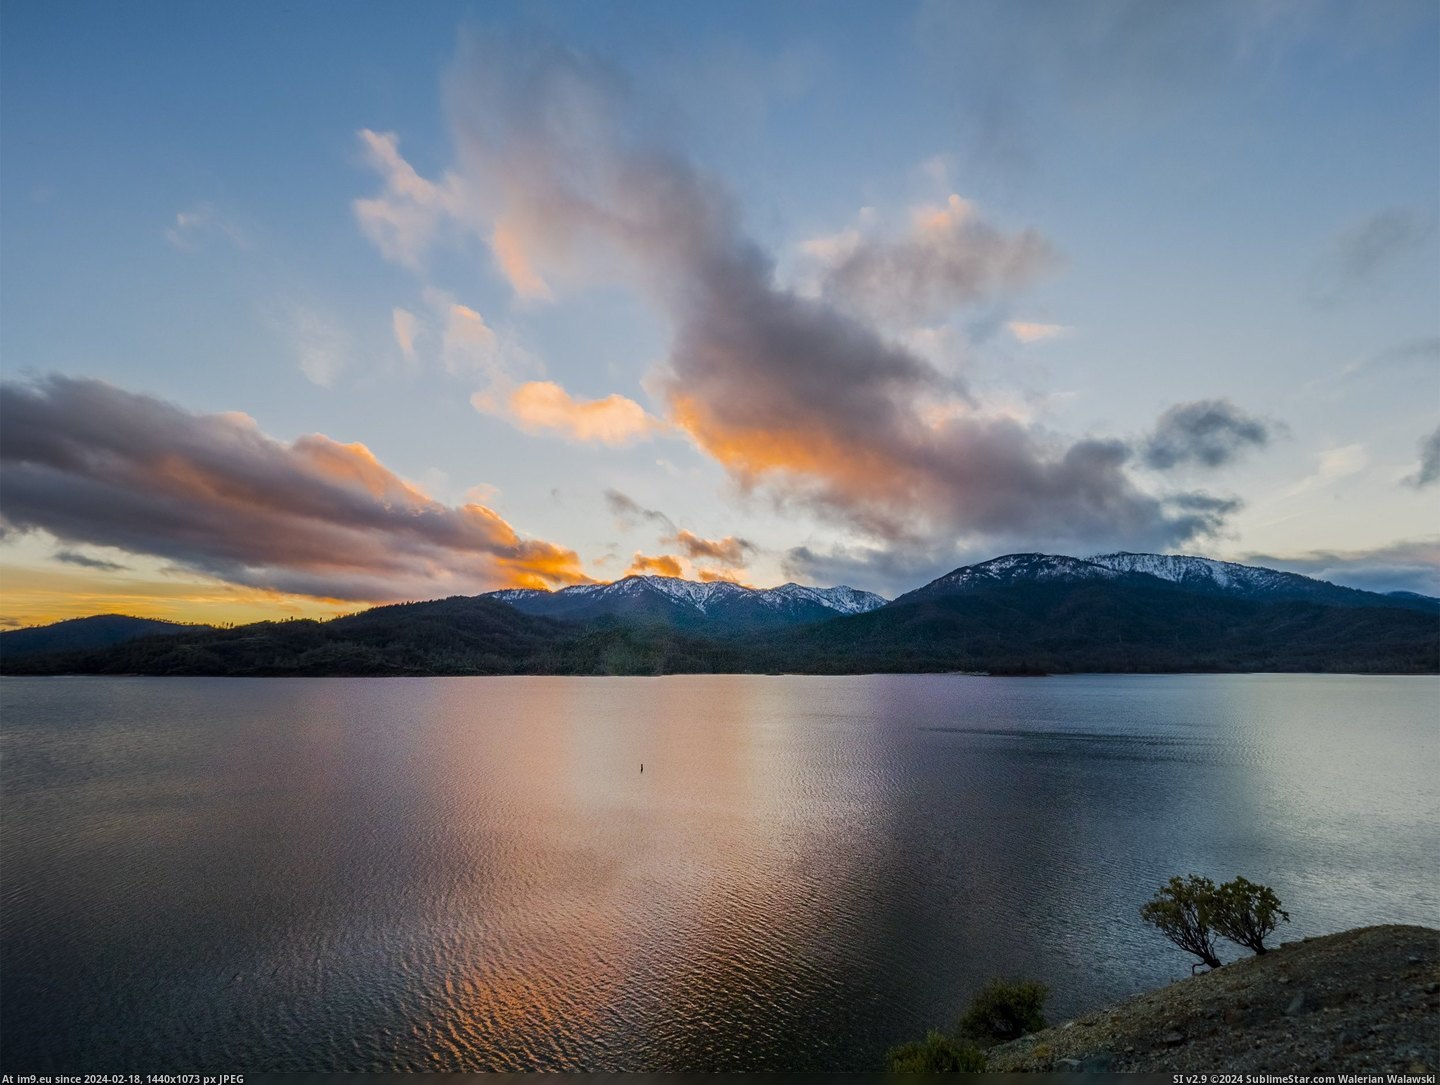 #Lake #California #Sunset #Gorgeous #Northern #Capped #Snow #Tonight #Mountains [Earthporn] Tonight's Sunset over Whiskeytown Lake in Northern California and Snow-Capped Mountains was gorgeous. [2500x1875] Pic. (Image of album My r/EARTHPORN favs))